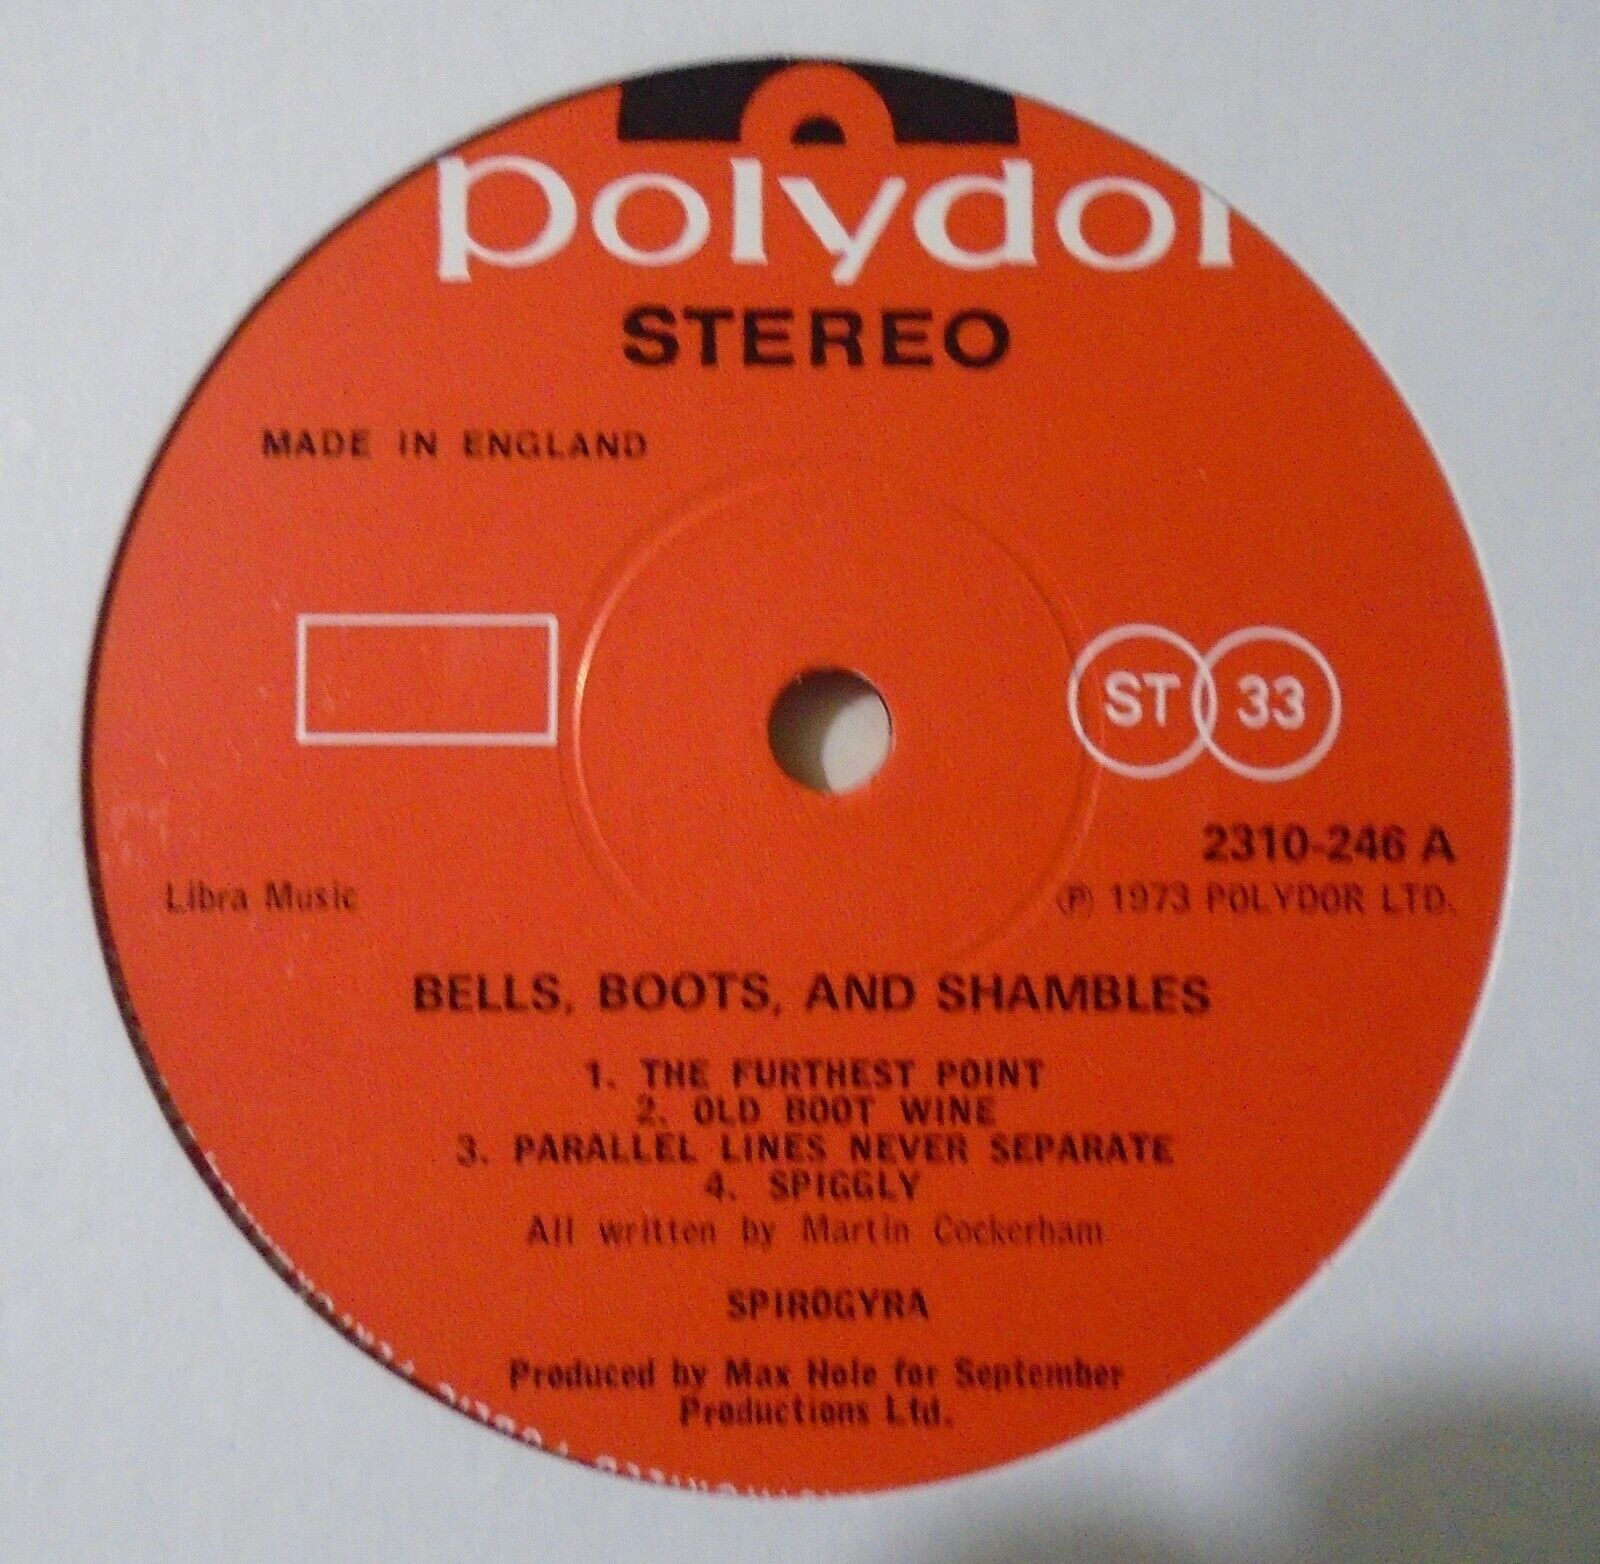 Pic 2 SPIROGYRA,Bells,Boots And Shambles.Rare 1973 Vinyl LP in Ex Condition.2310 246.